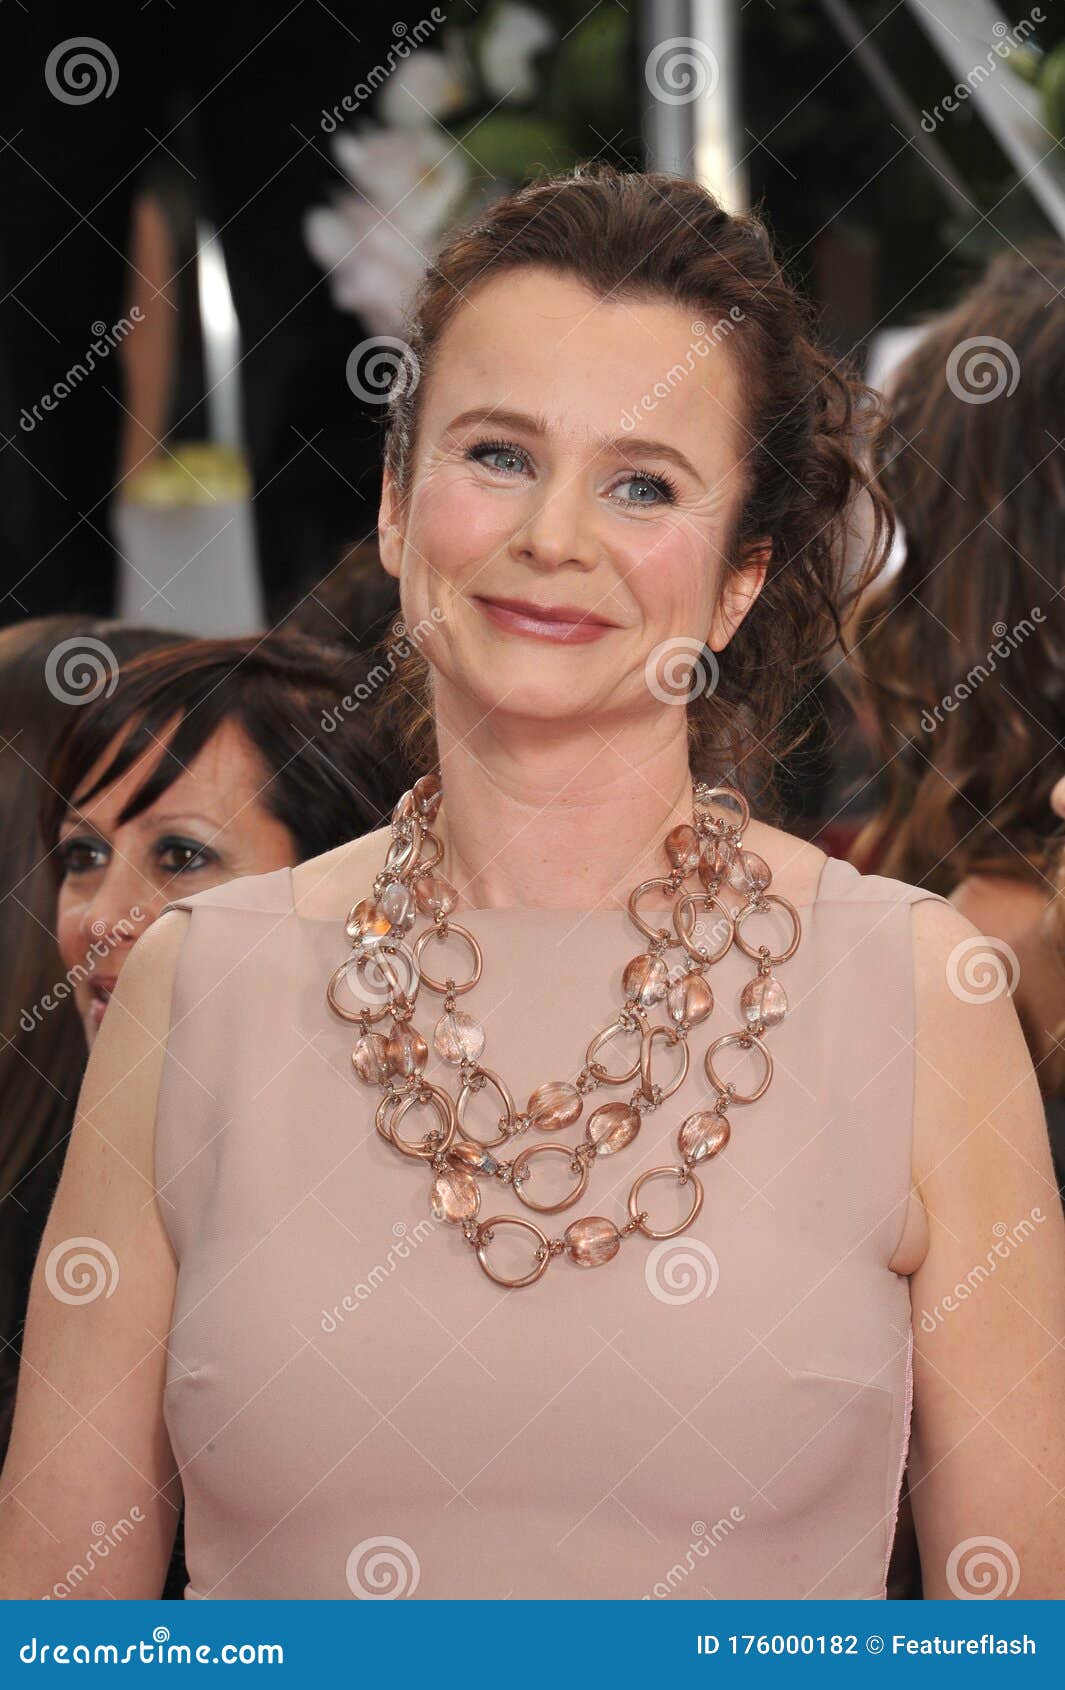 Picture of emily watson